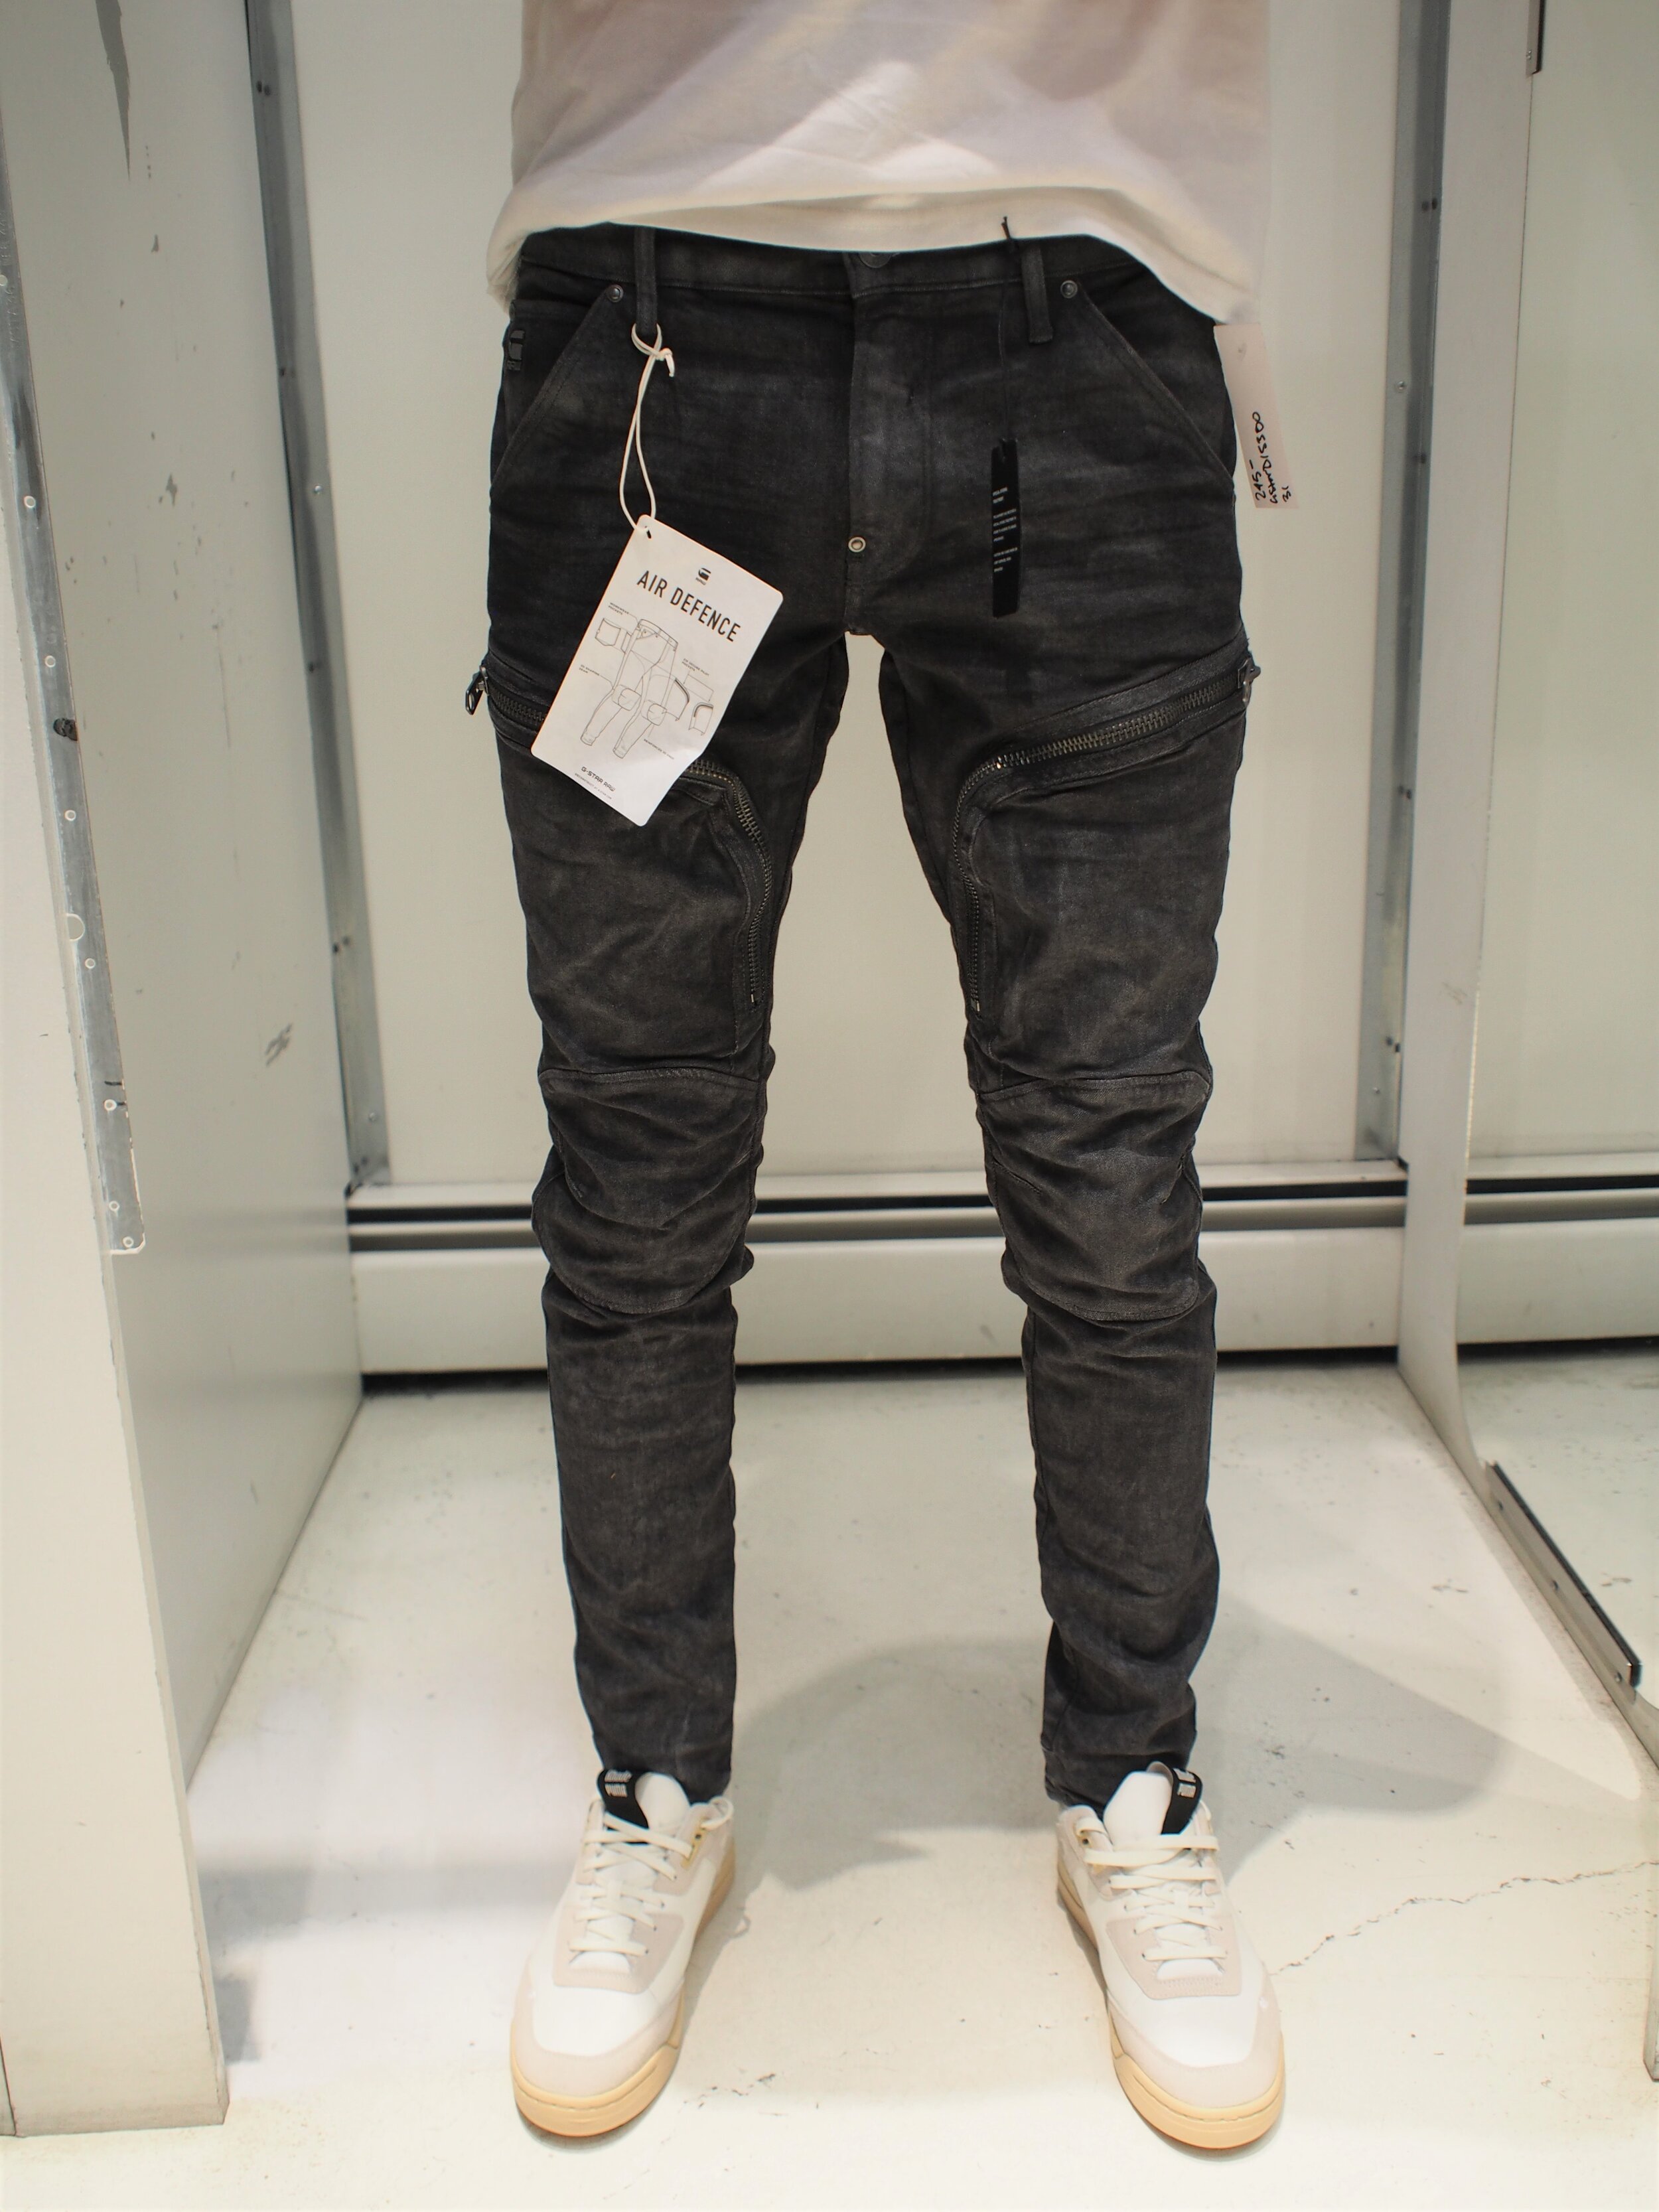 G-Star Raw Air Defence Zip Skinny Jeans 